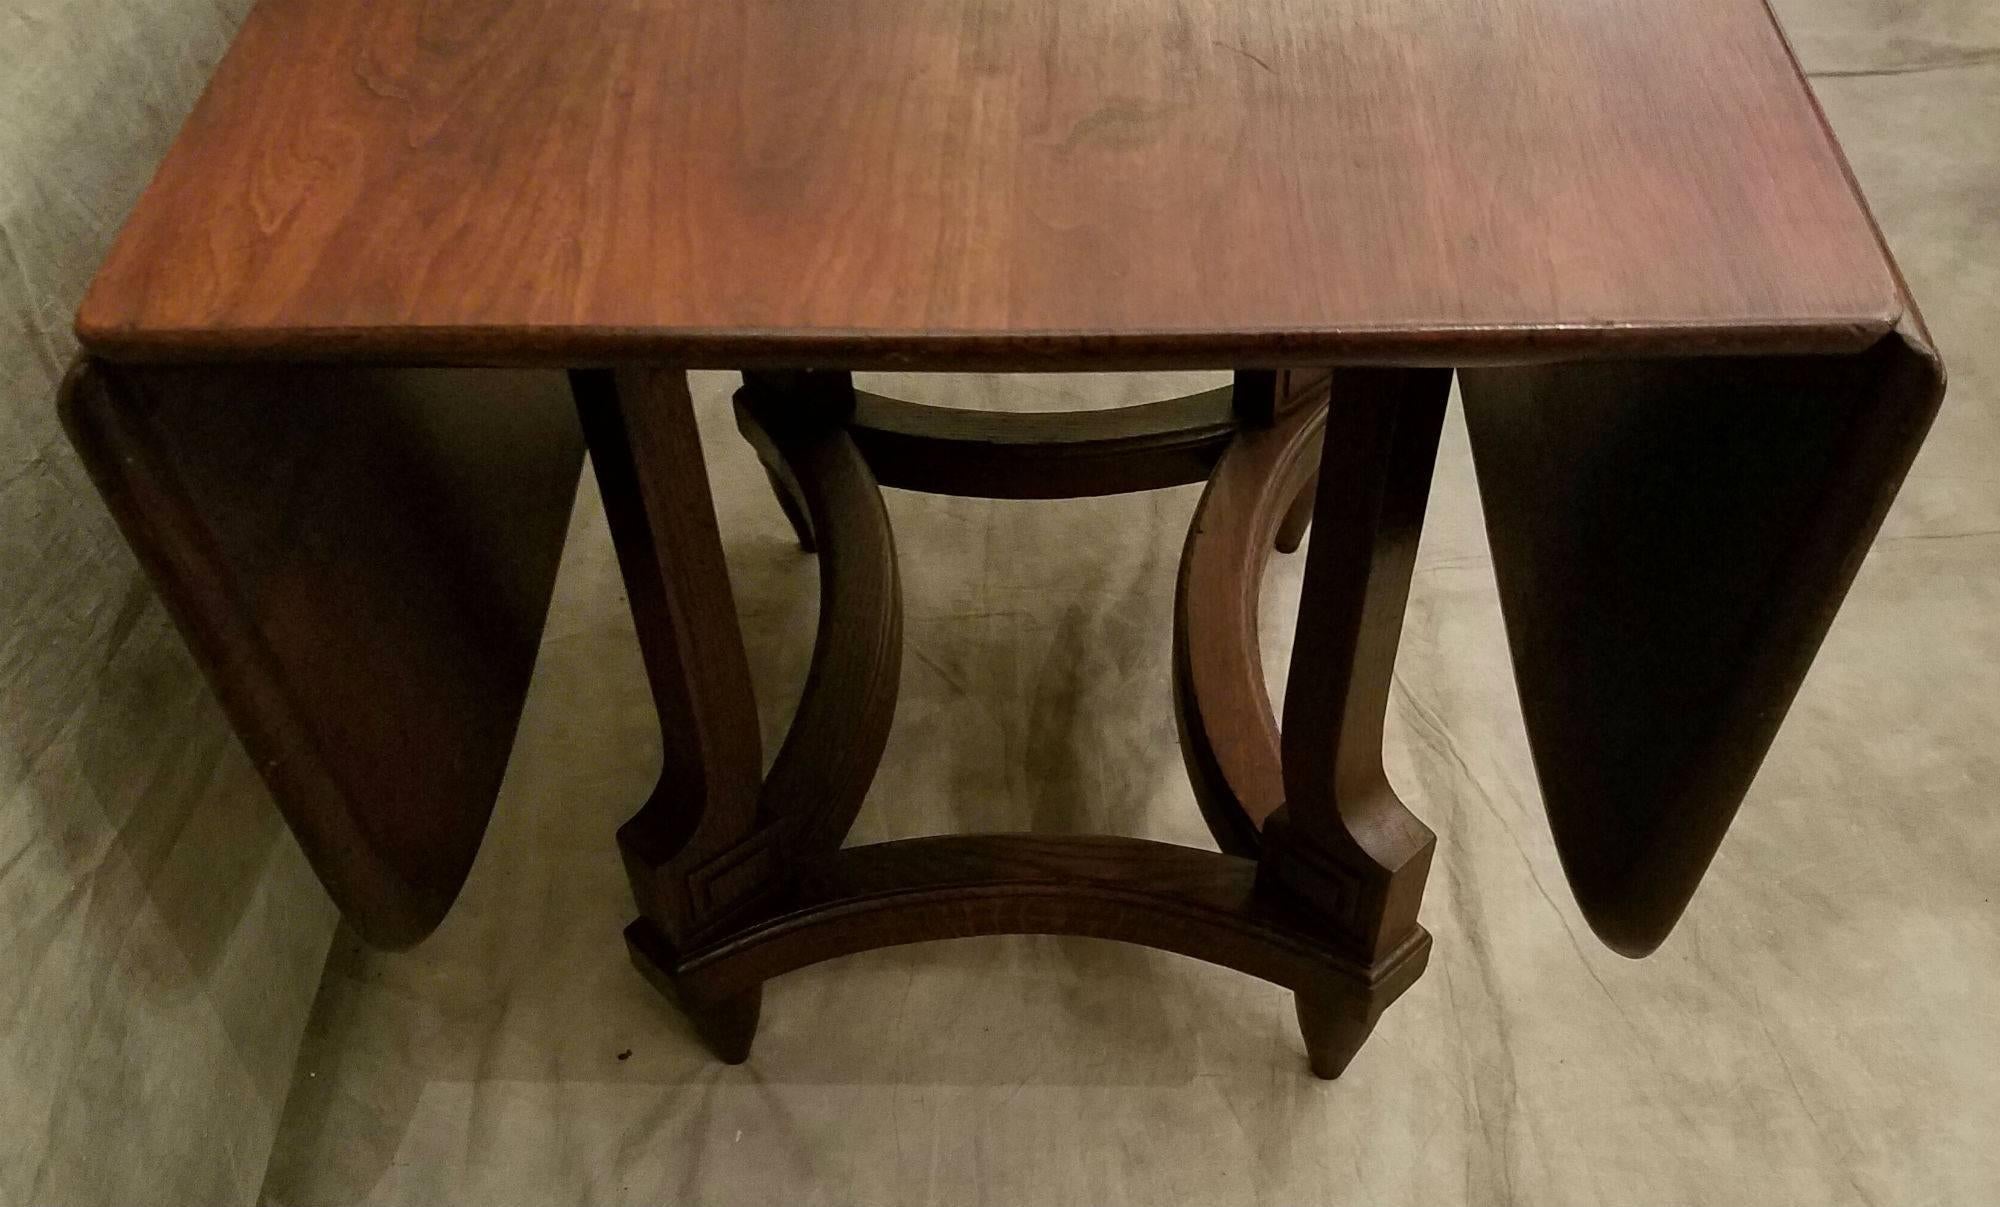 Stickley drop-leaf table, branded: Stickley & Syracuse. Table closed: H: 29